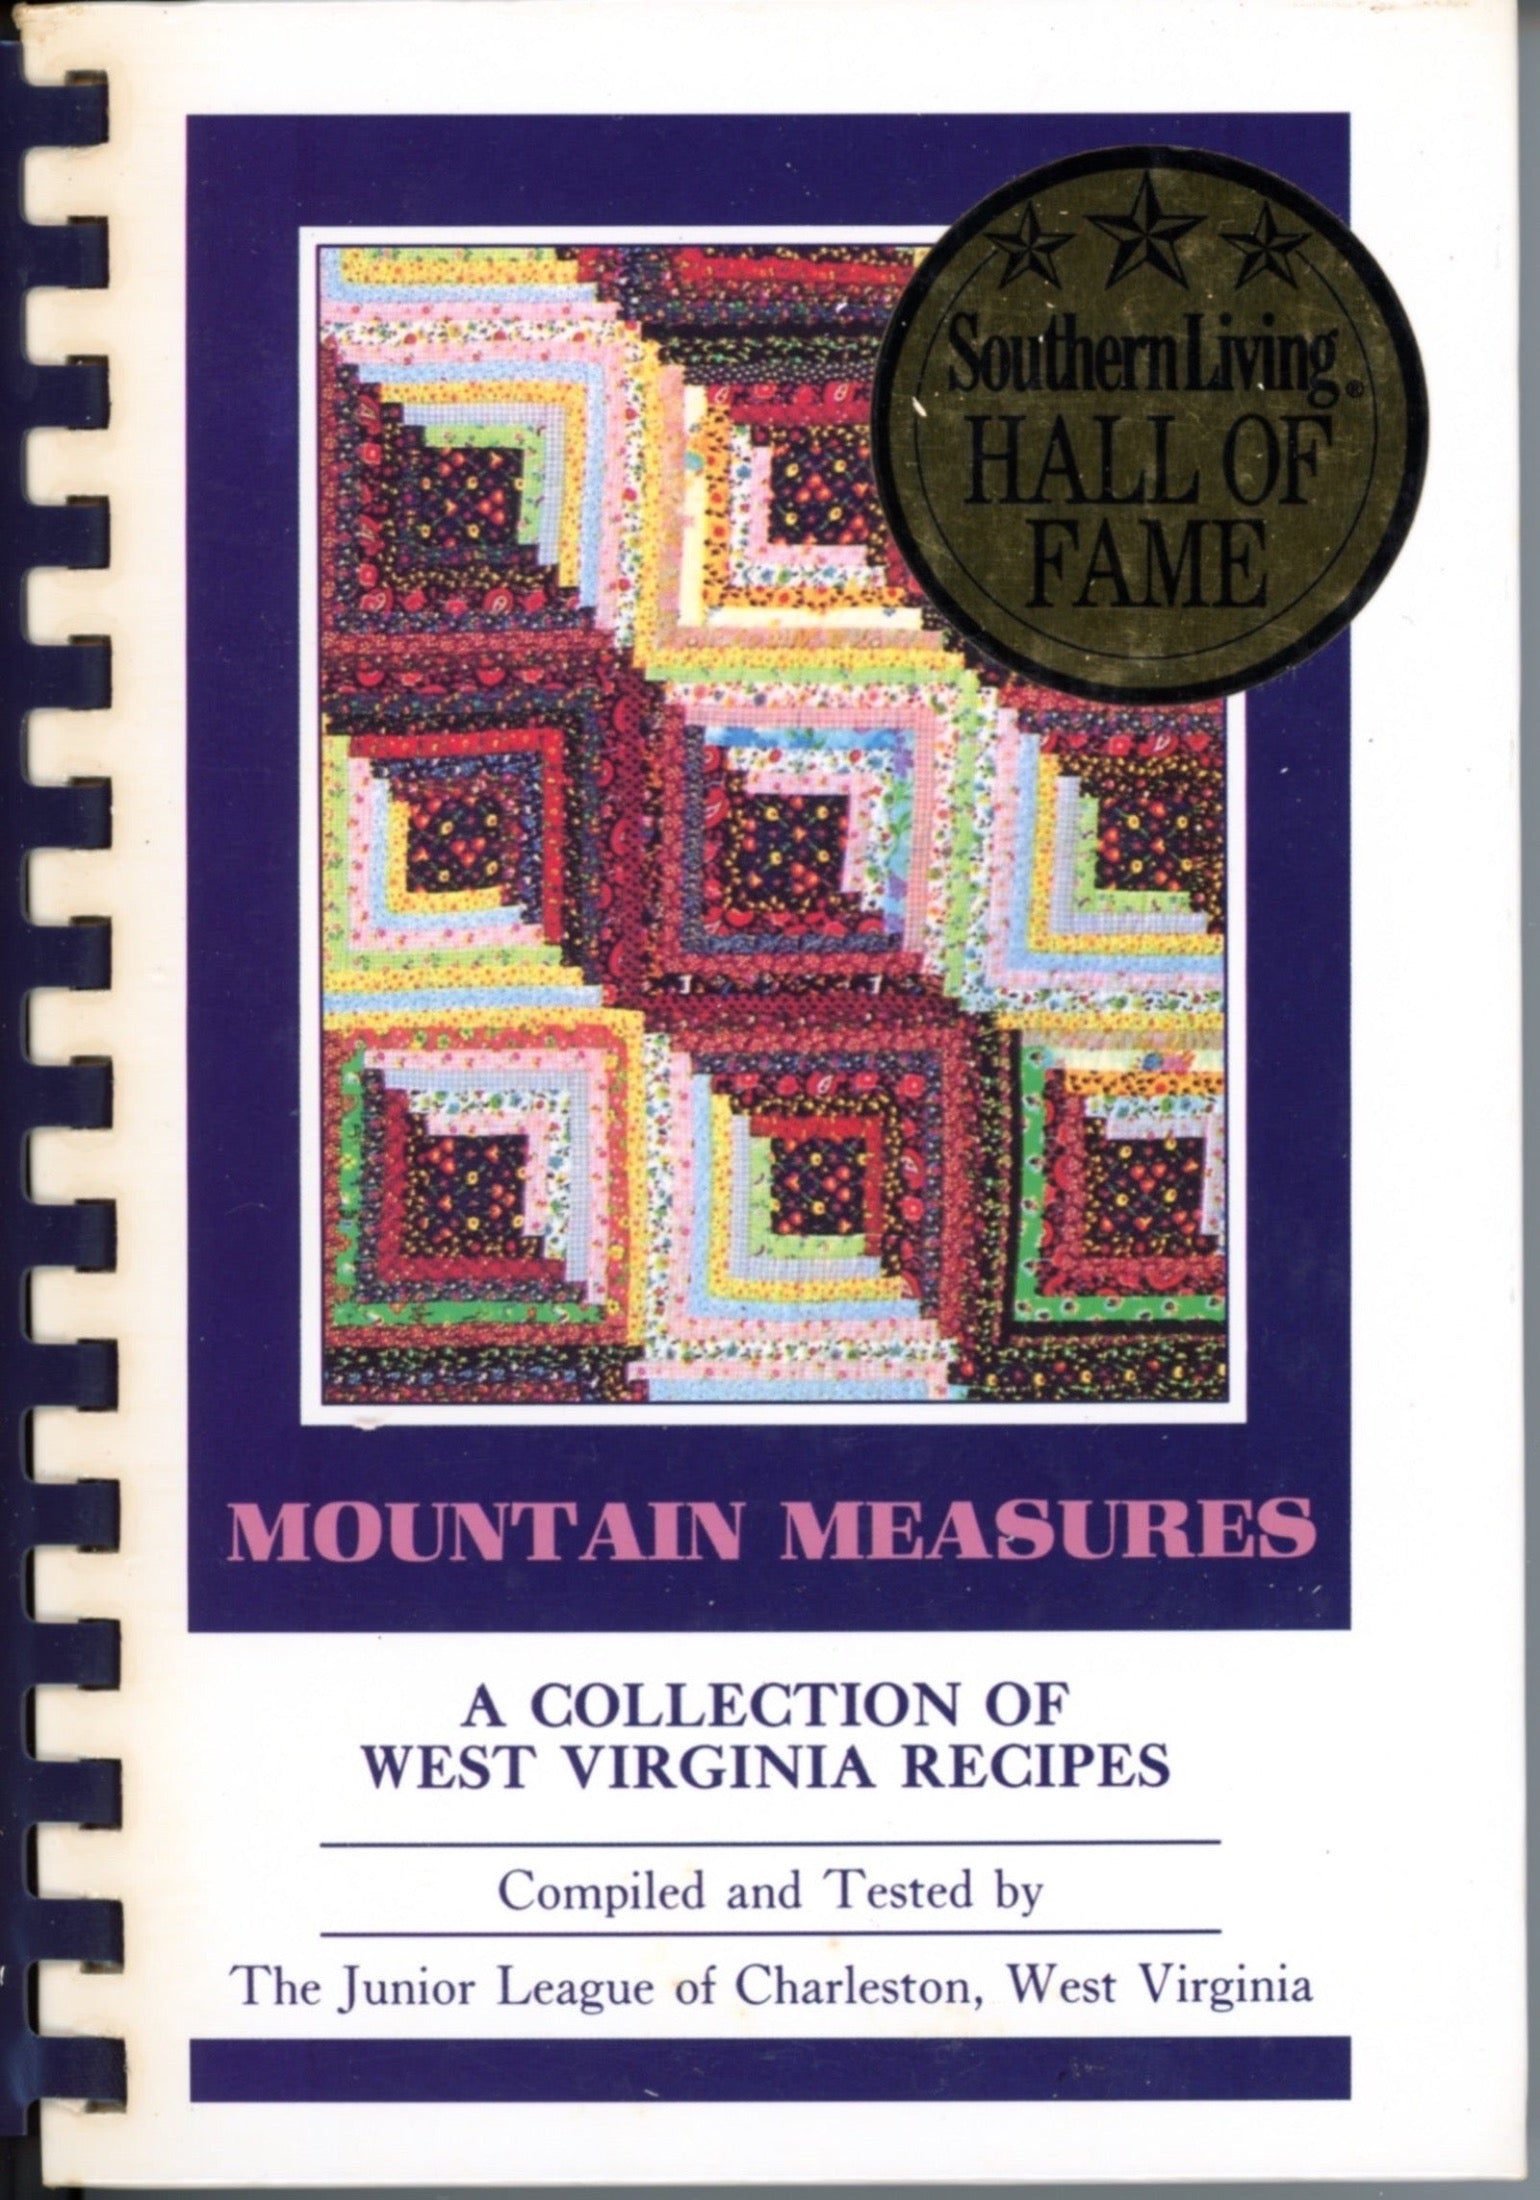 MOUNTAIN MEASURES: A Collection of West Virginia Recipes 1993 ©1974